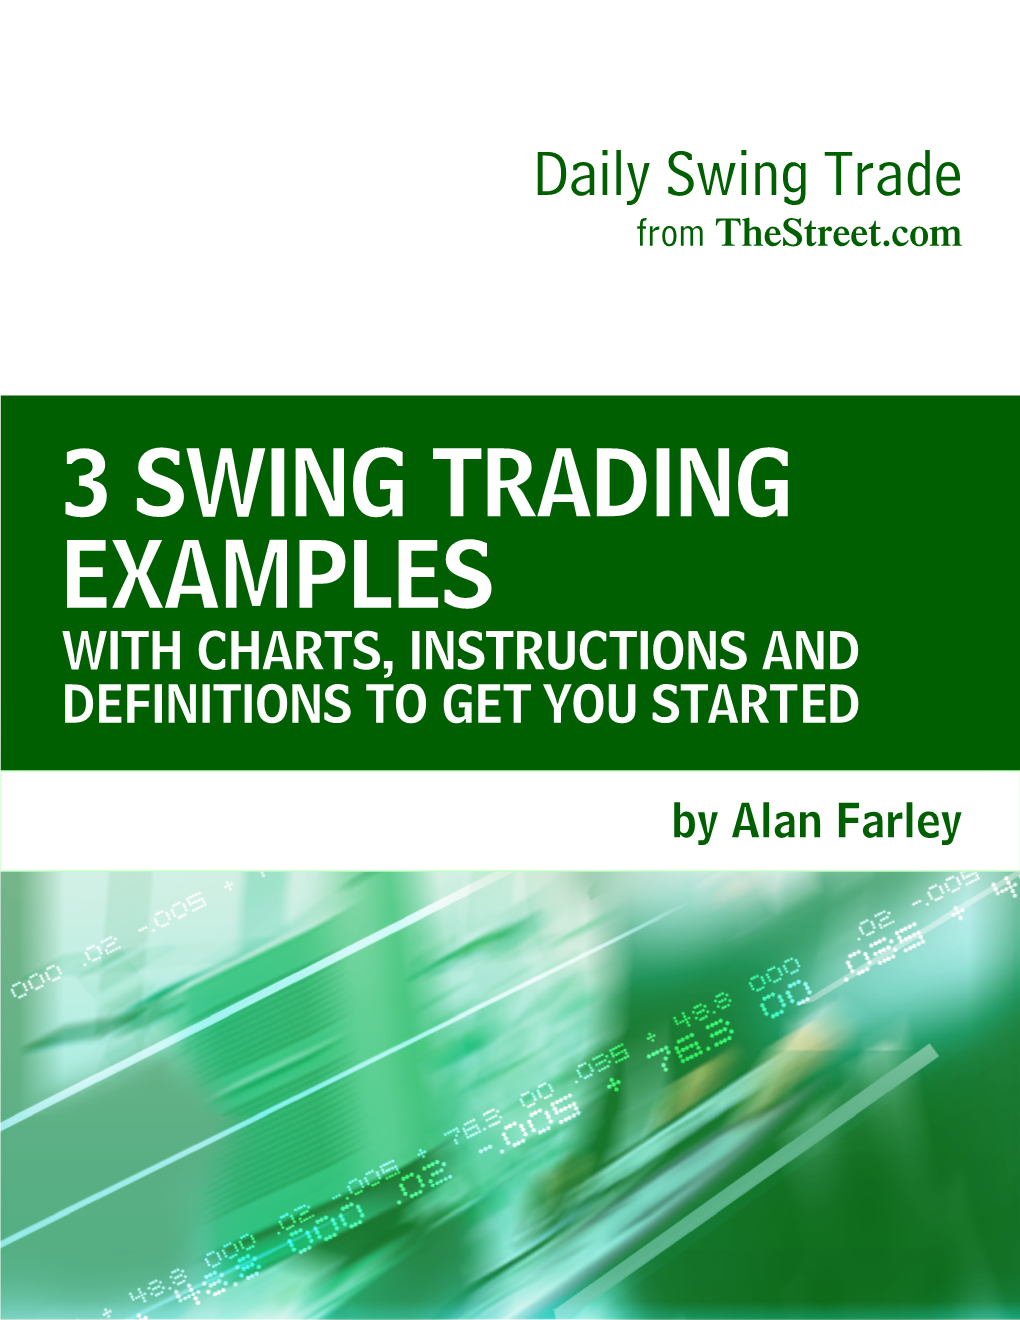 3 Swing Trading Examples with Charts, Instructions and Definitions to Get You Started